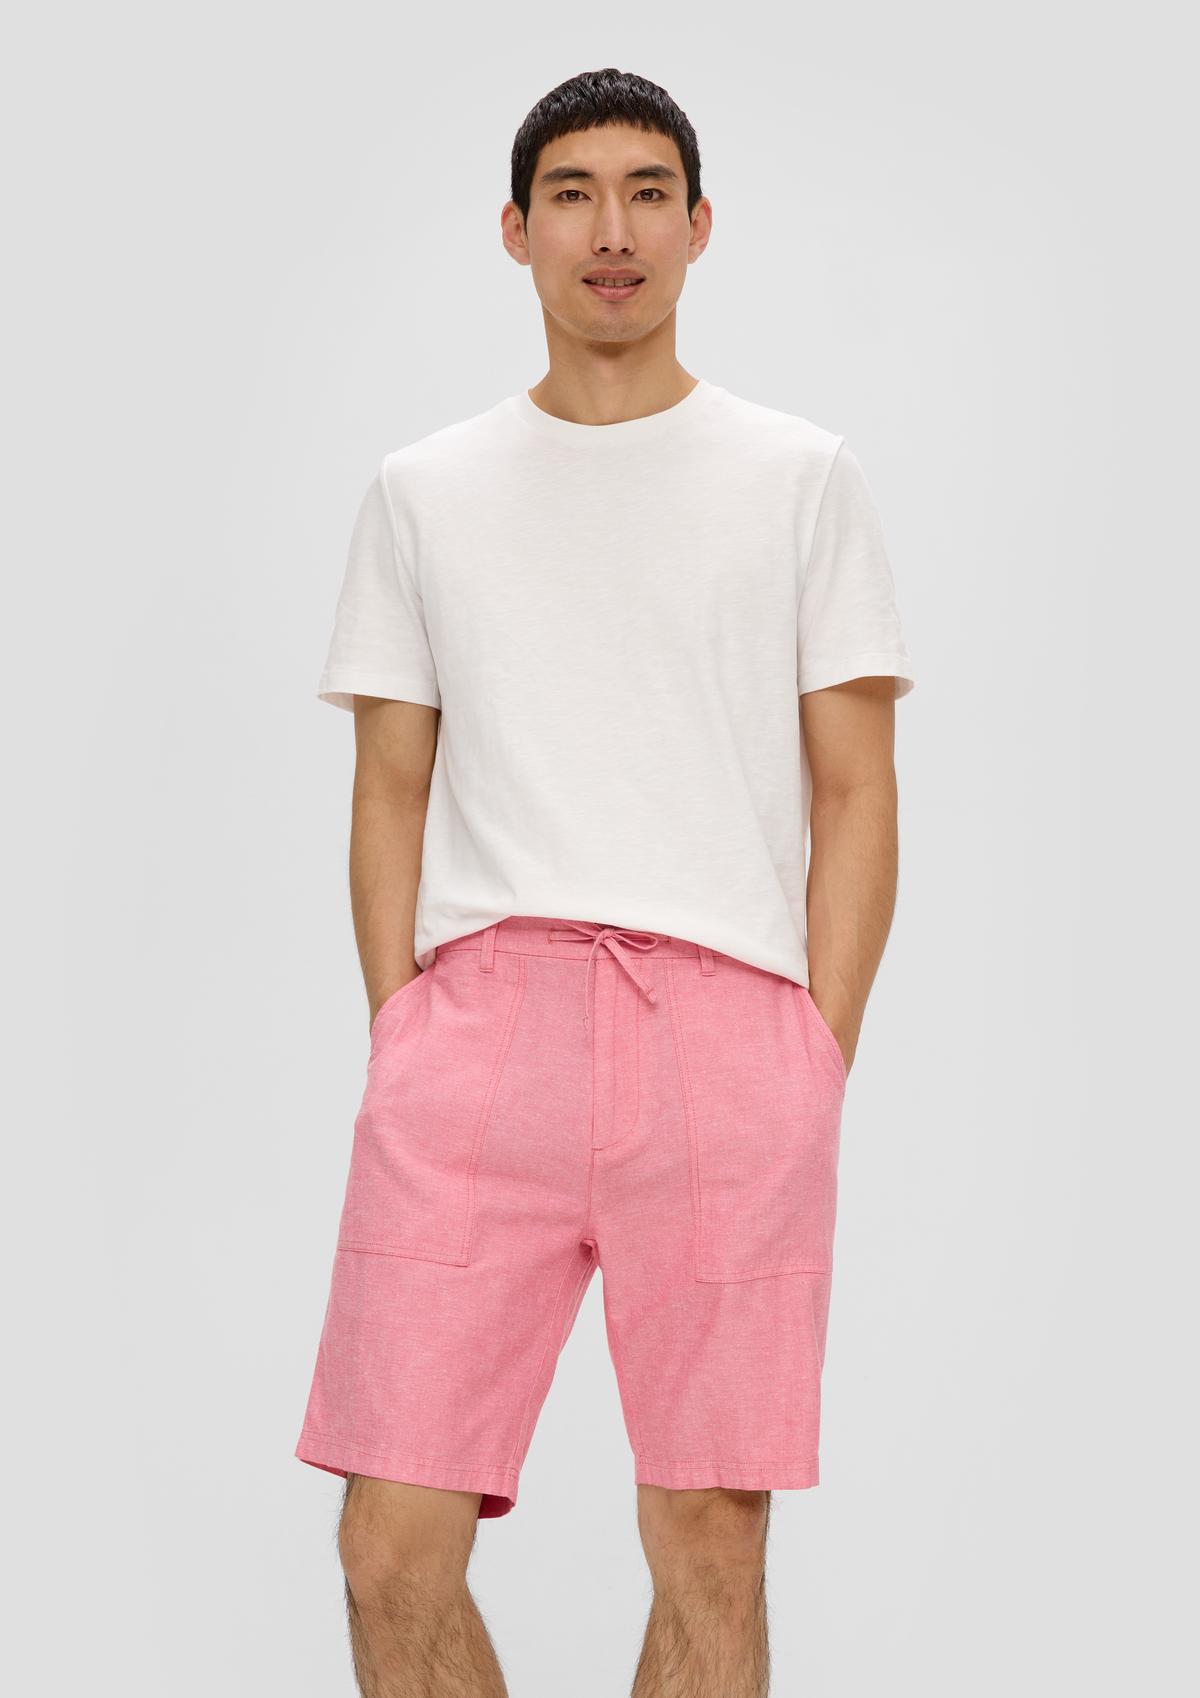 Chino shorts in a linen blend with an elasticated waistband